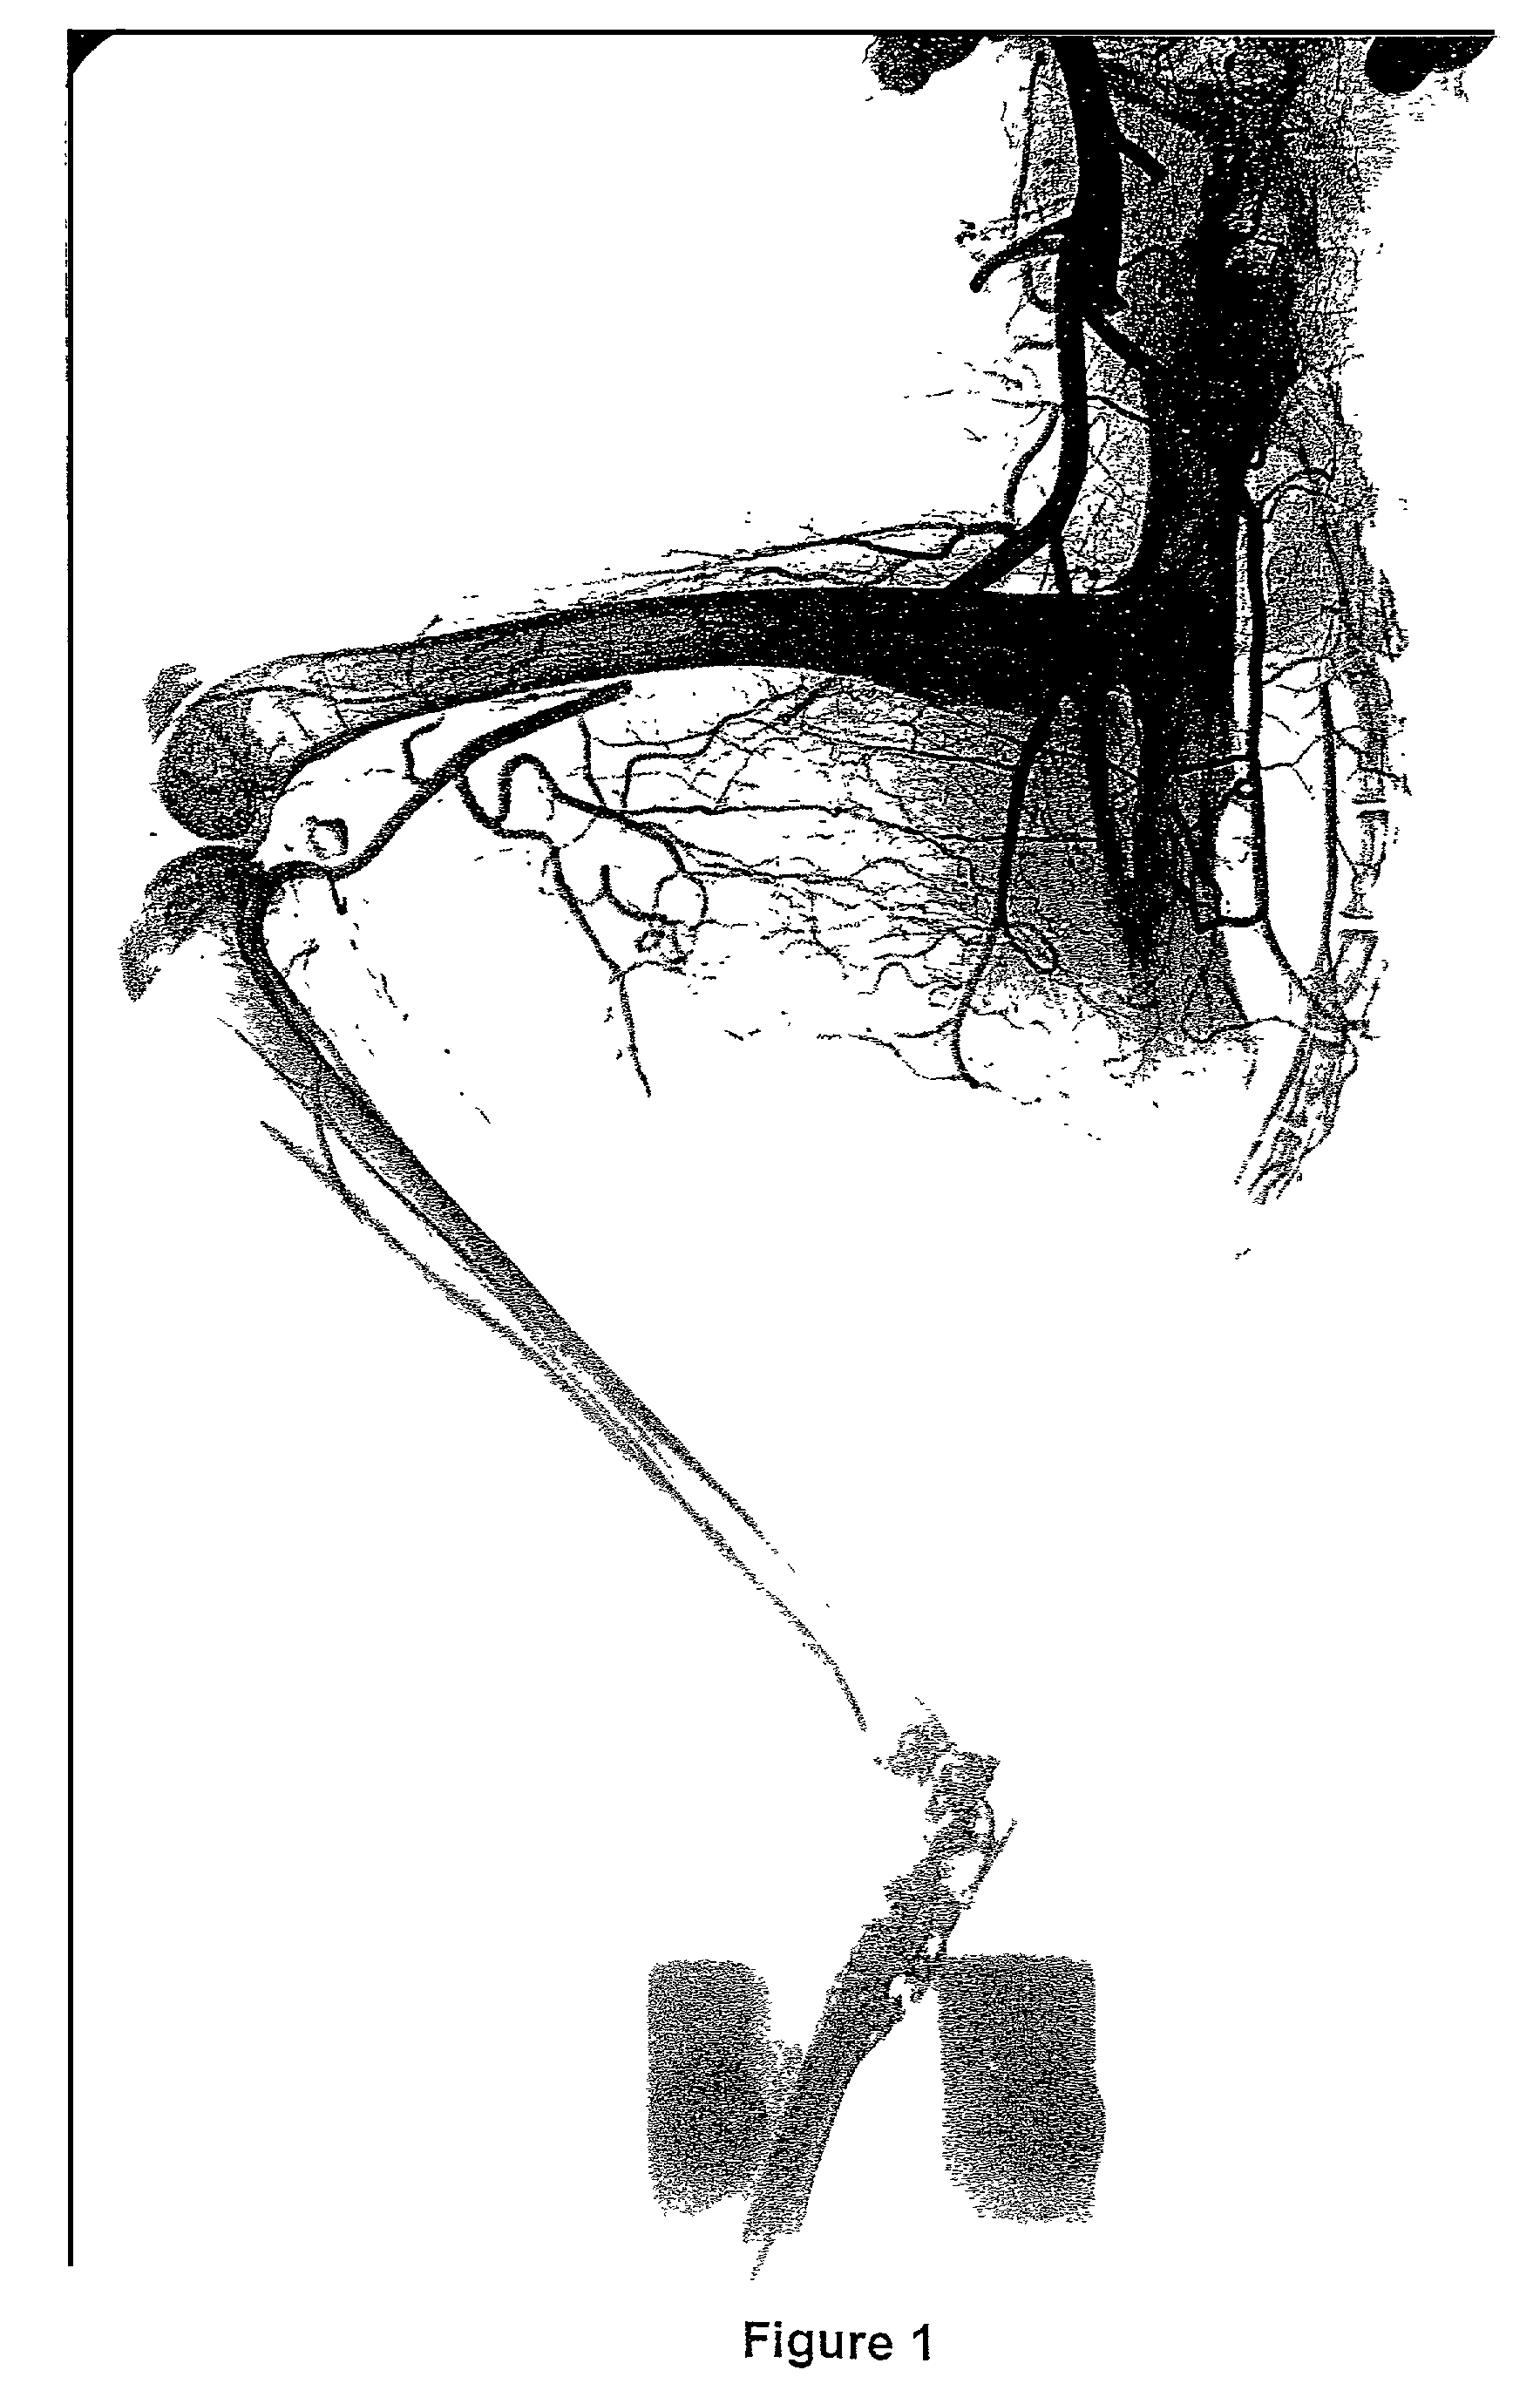 Methods for the modulation of neovascularization and/or the growth of collateral arteries and/or other arteries from preexisting arteriolar connections